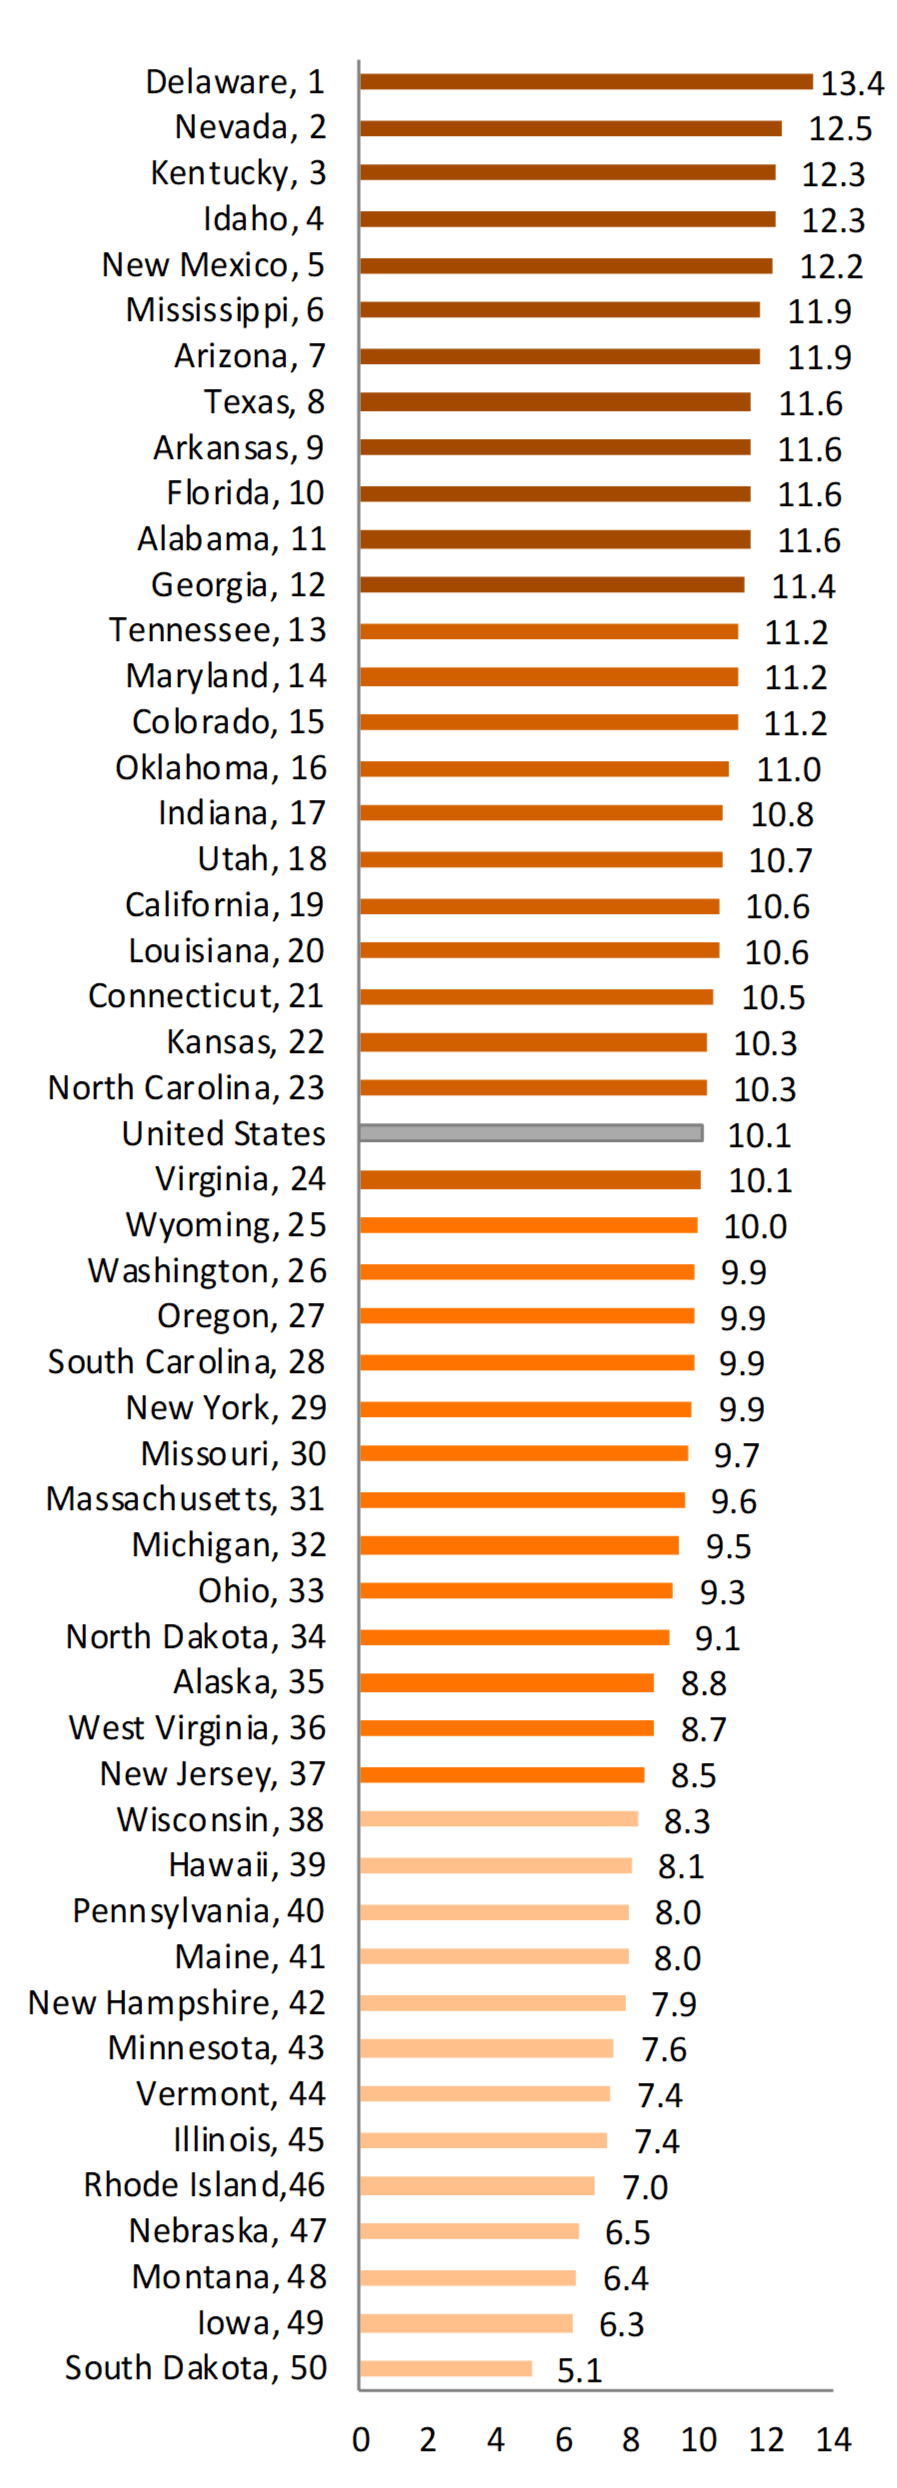 Figure 3. State Variation in the Divorce Rate per 1,000 Married Women Aged 50+ by Quartile, 2017